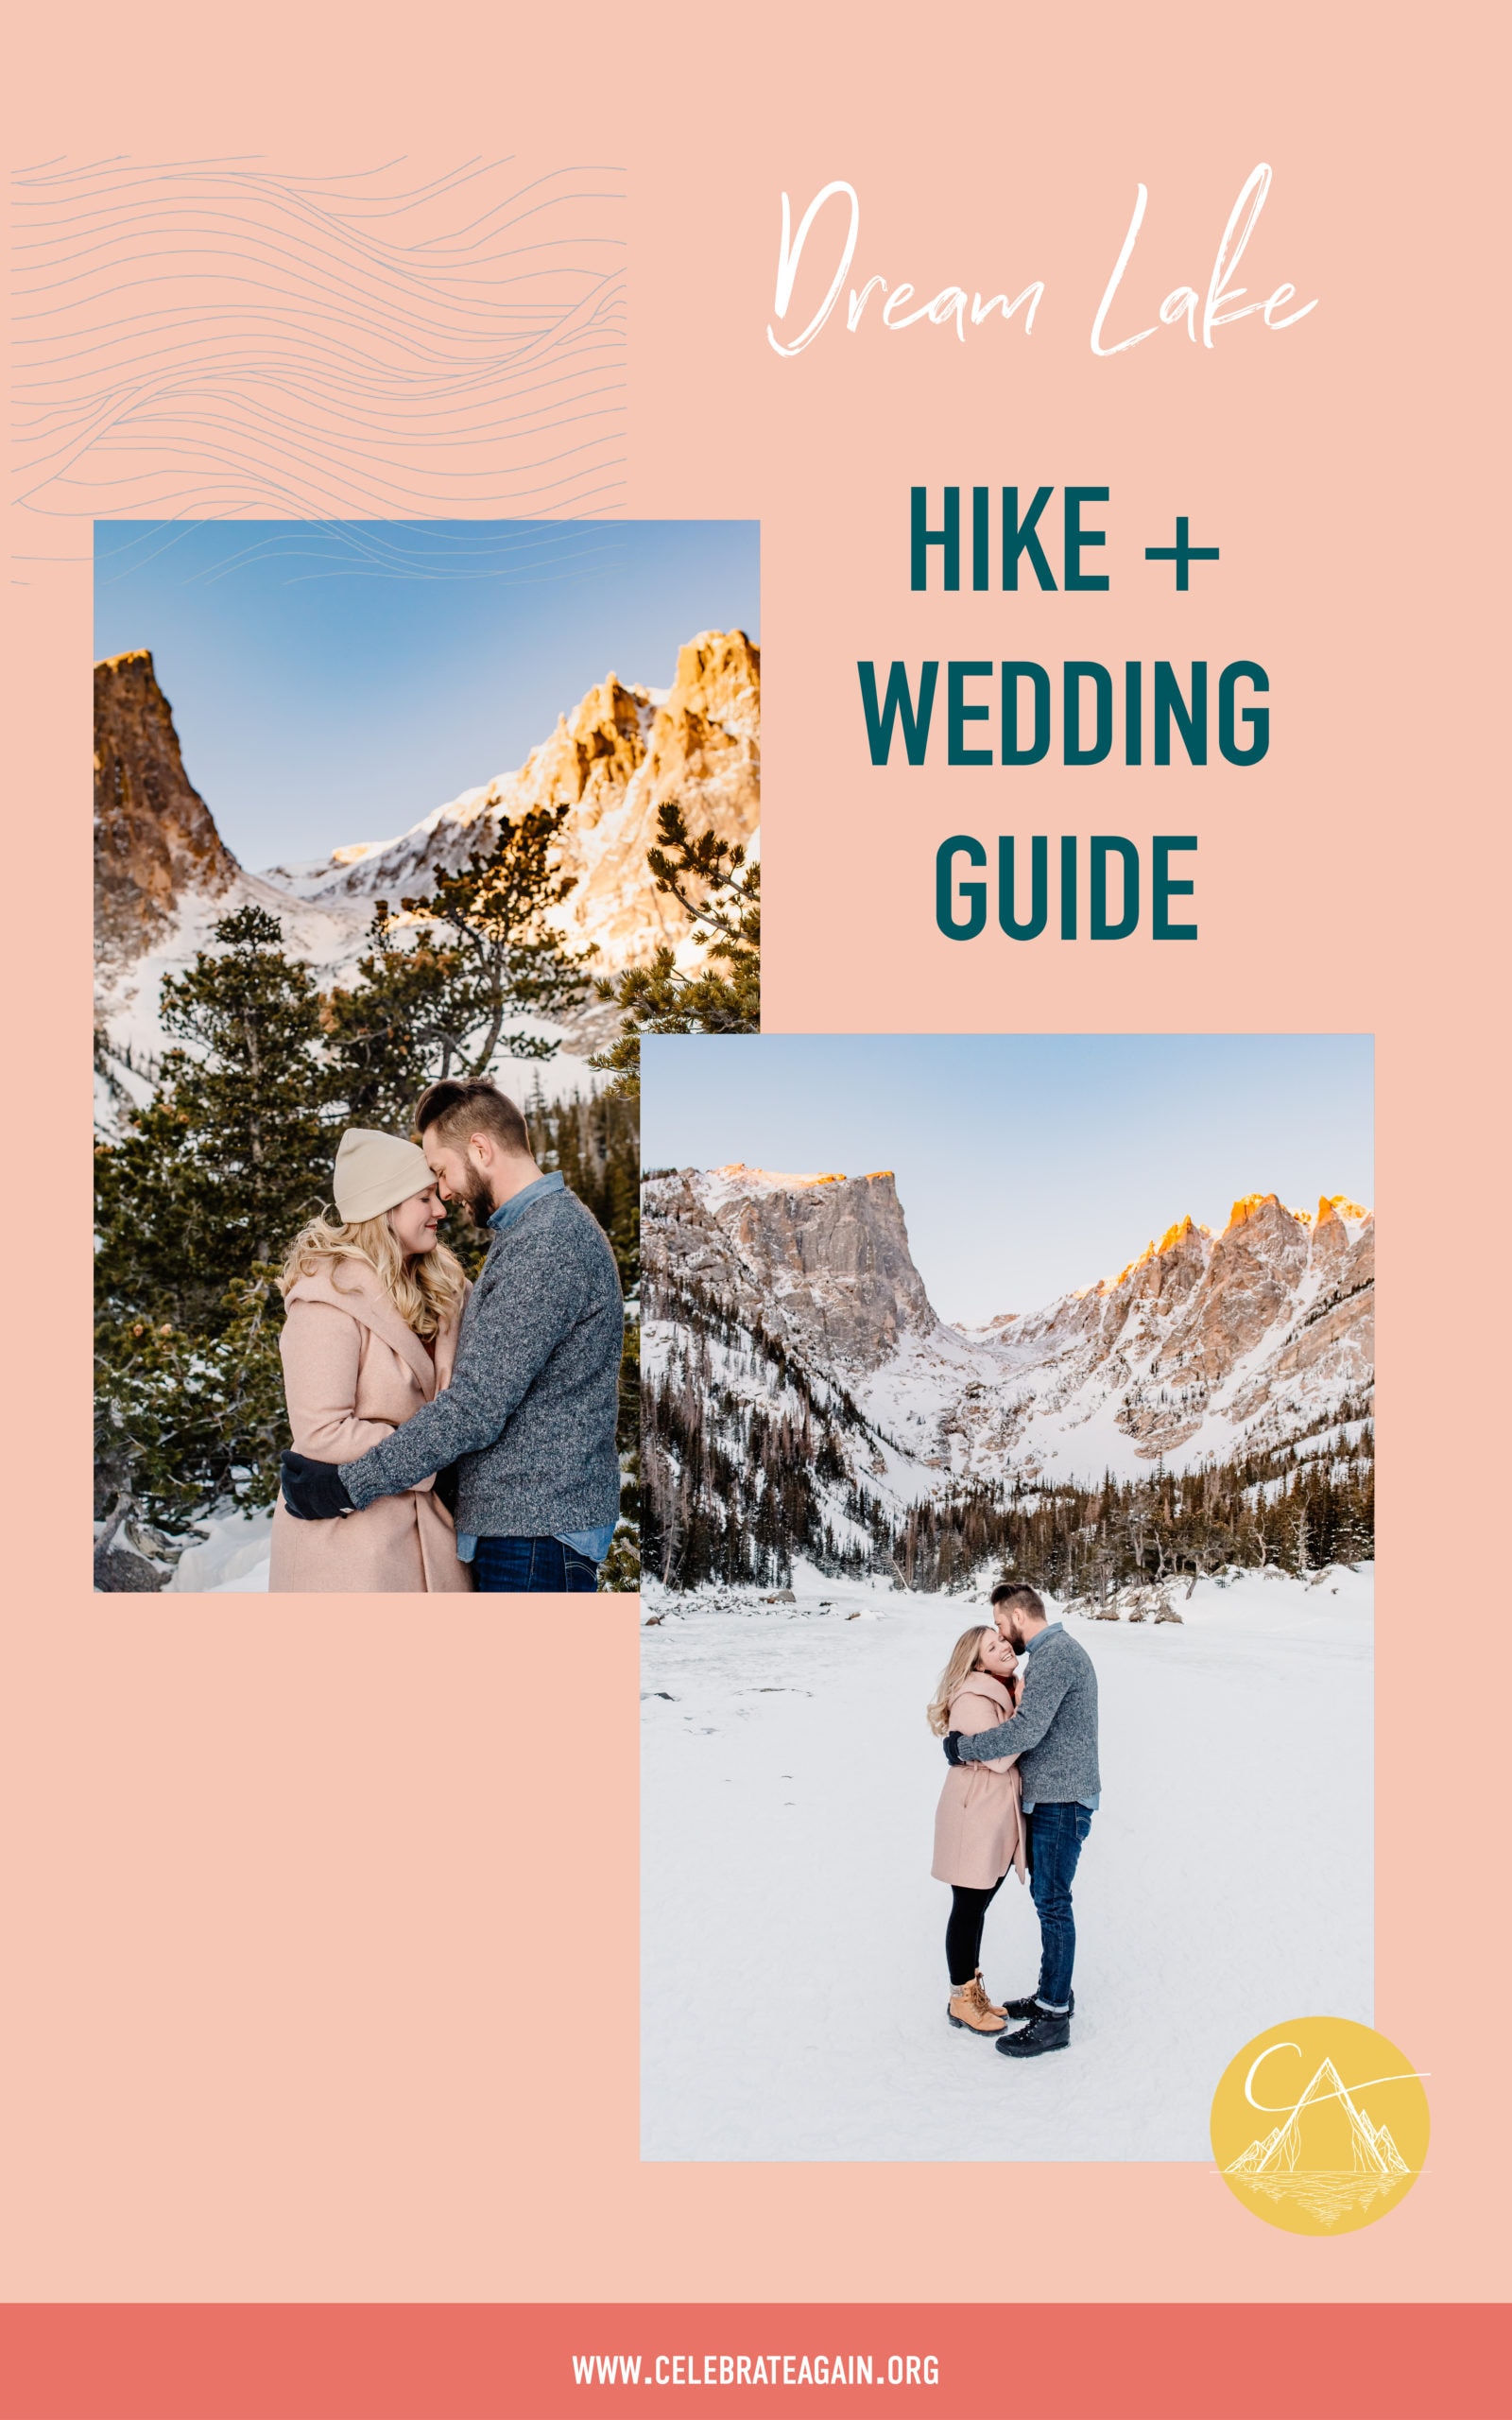 dream lake hike and wedding guide with images of couple at dream lake at sunrise